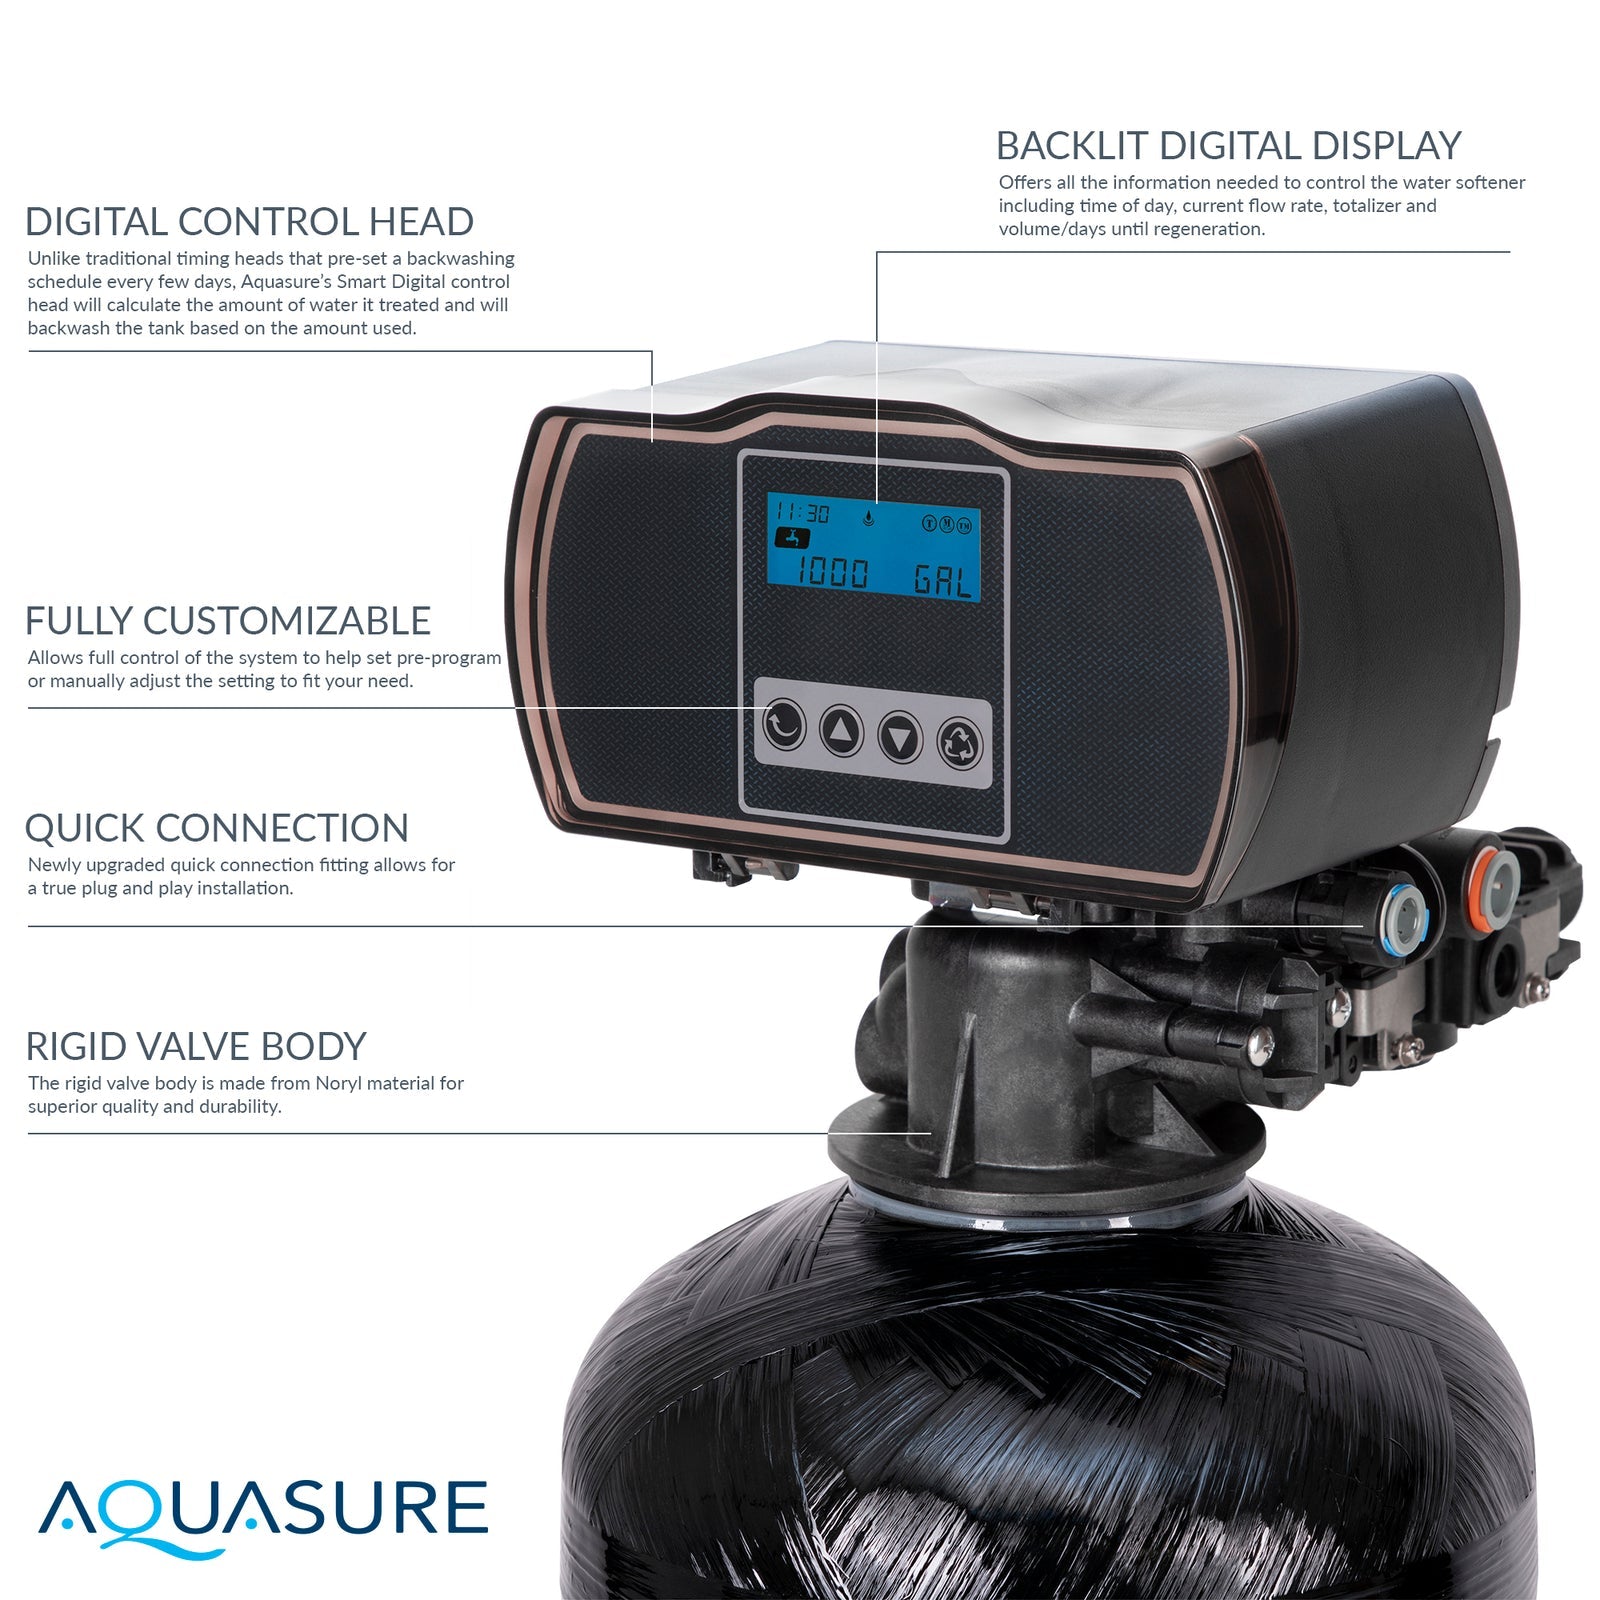 Aquasure AS-HS64FM Harmony Series 64,000 Grain Water Softener with Fine Mesh Resin for Iron Removal New